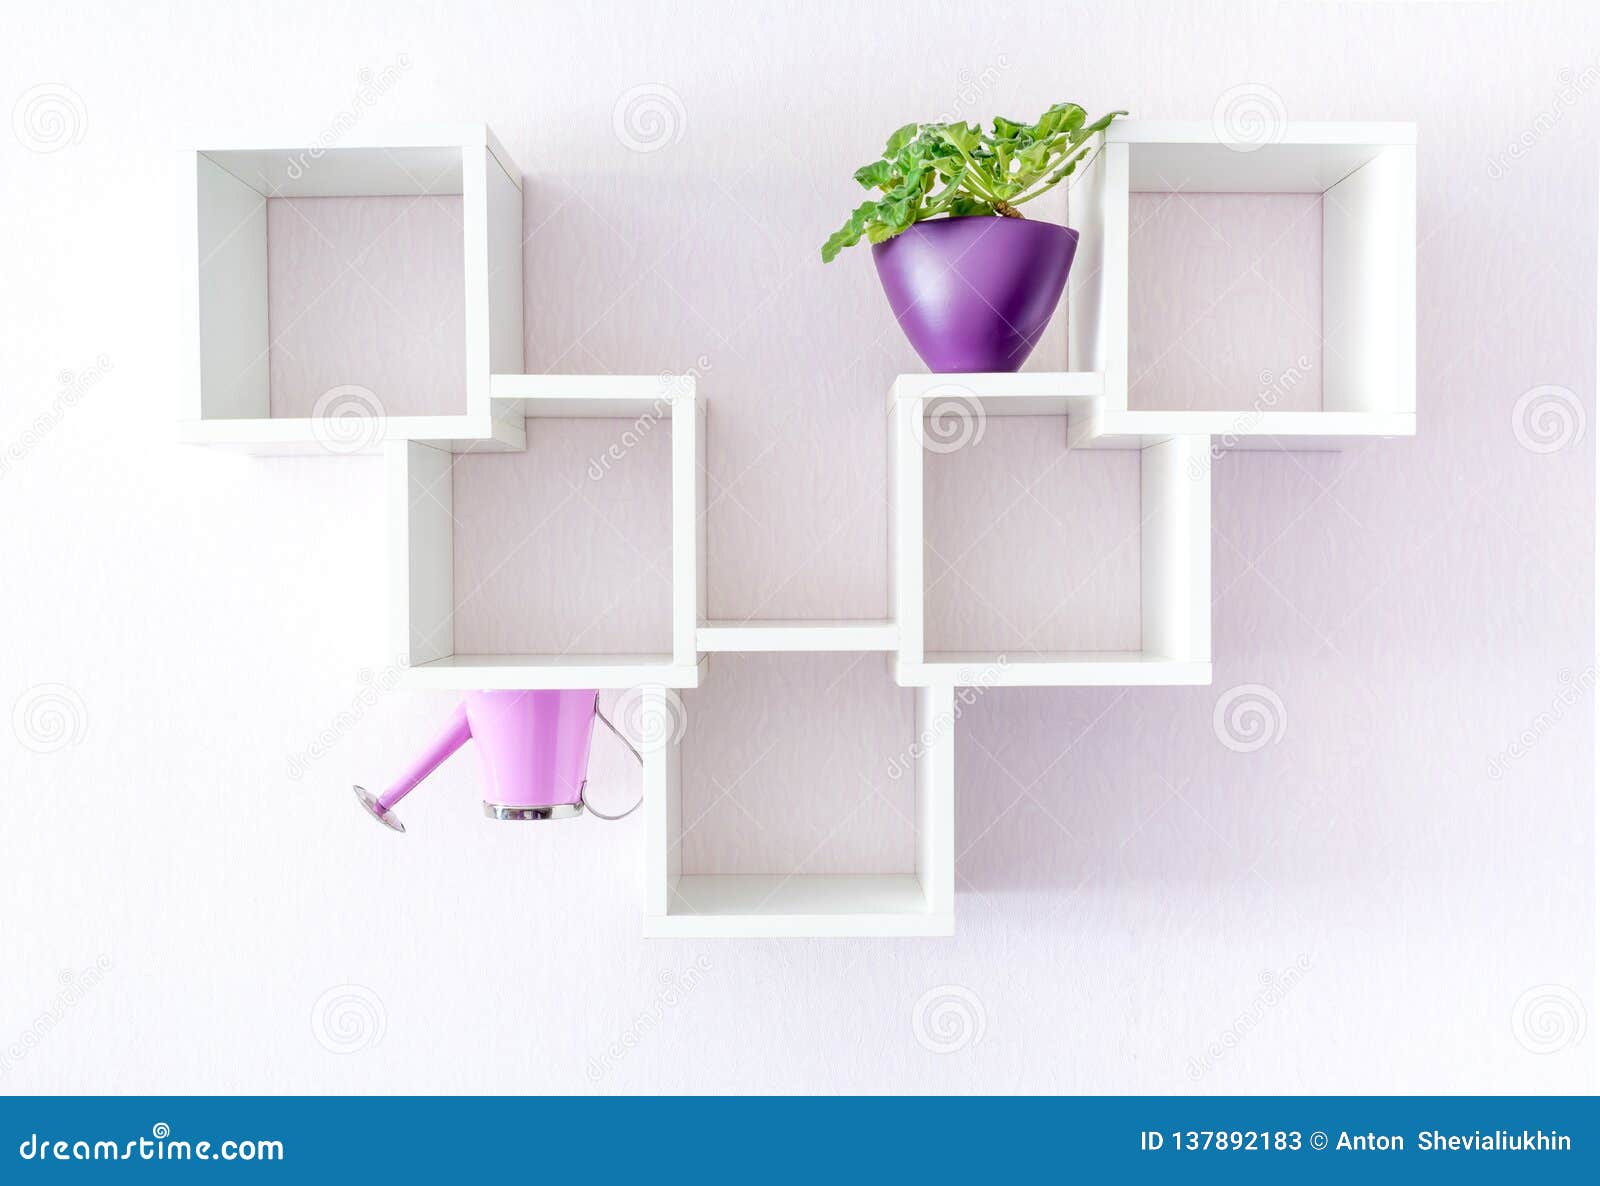 A Modern White Bookshelf On A White Wall With A Flower And A